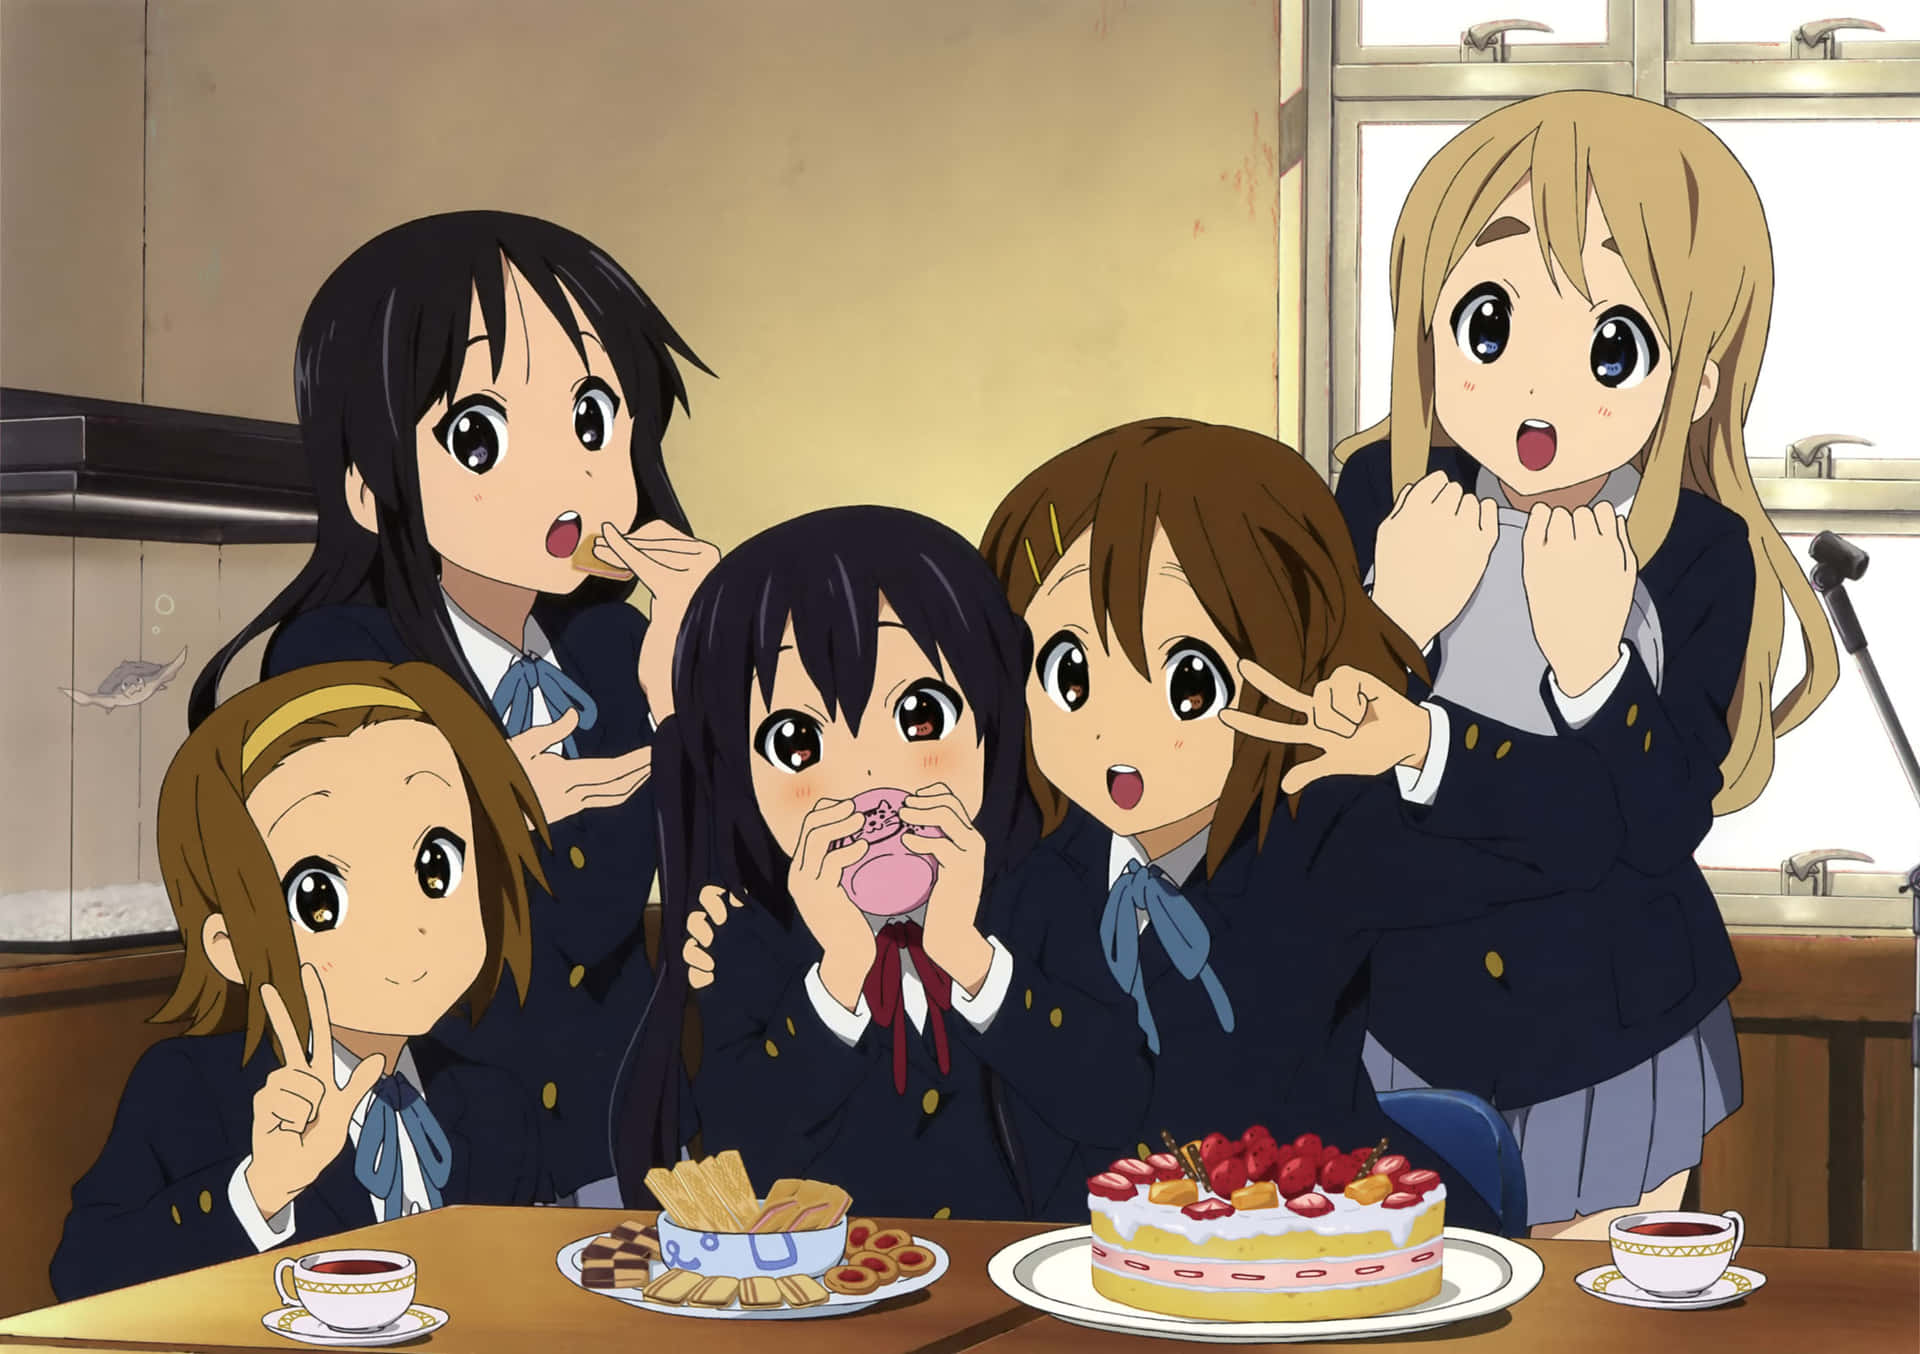 The five members of K-ON!